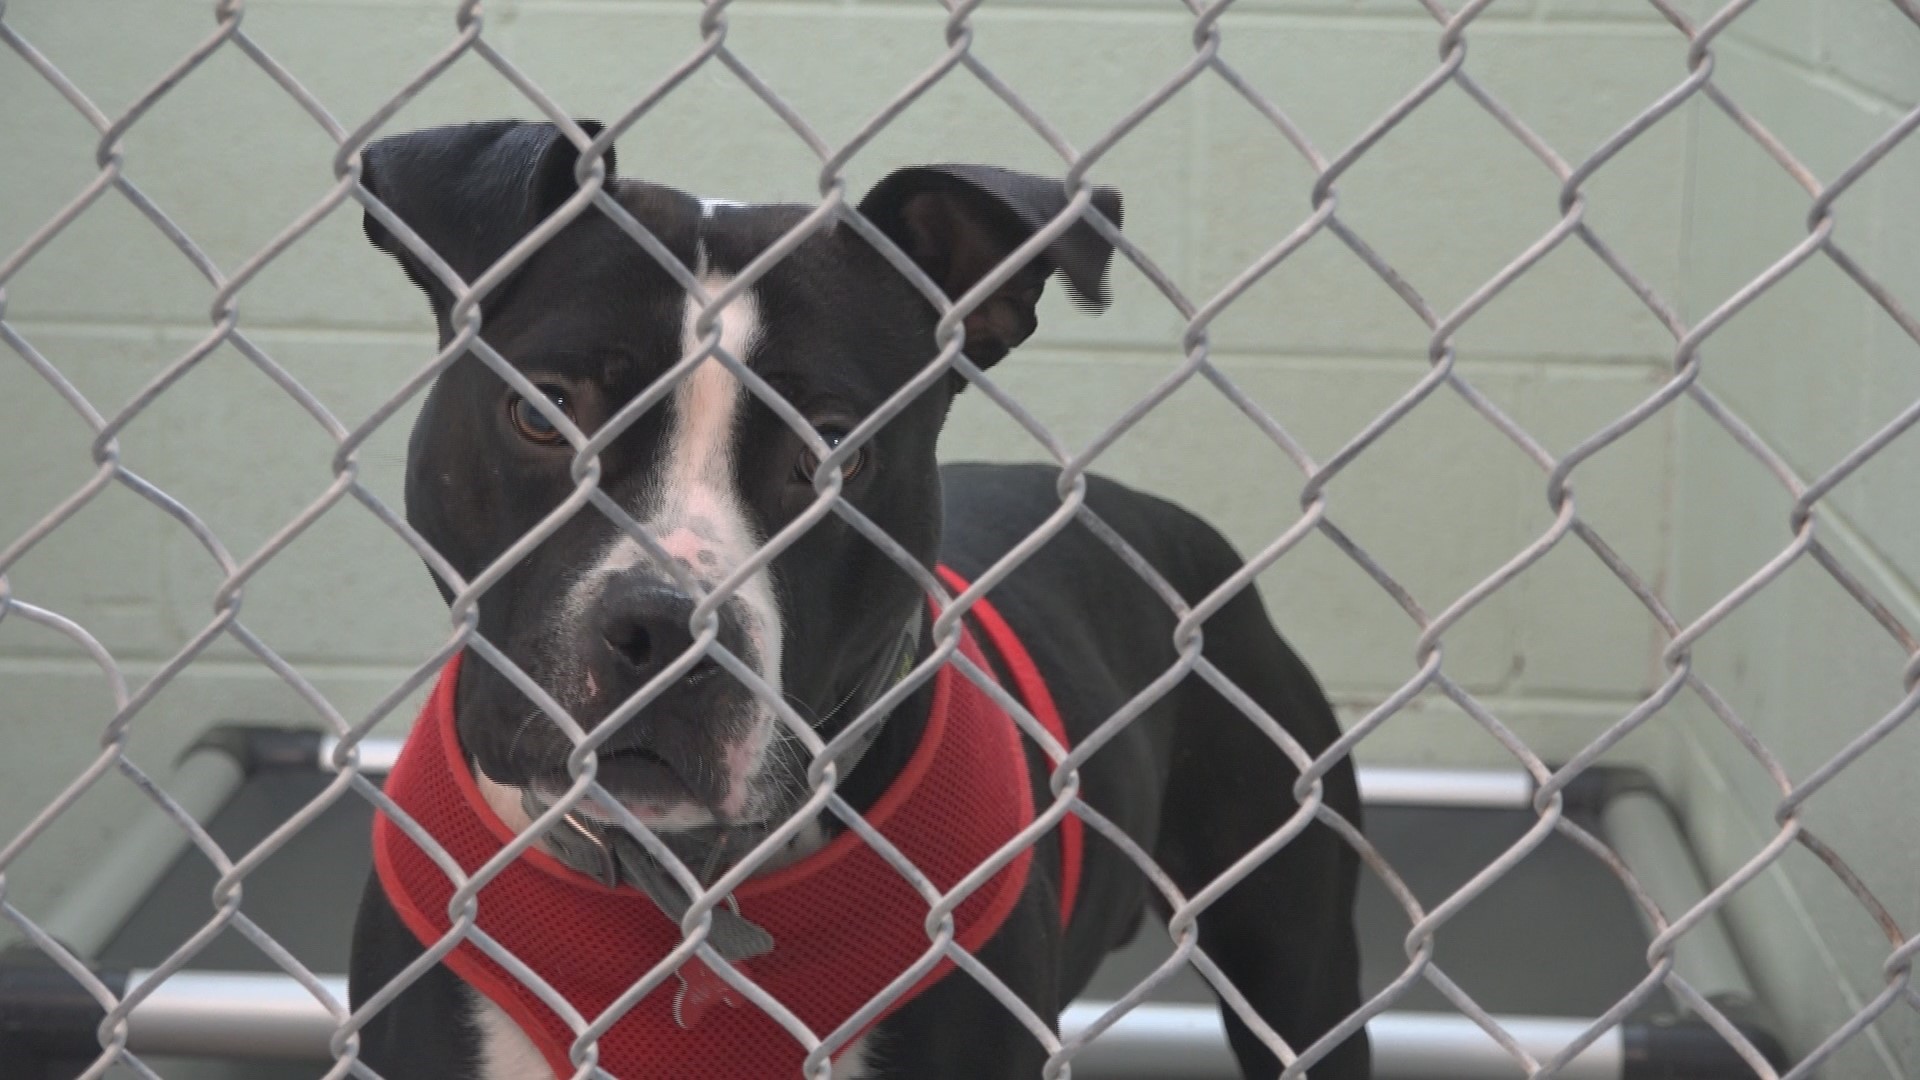 The founders of Pay it Forward Outreach decided to step back from the non-profit—so the animal shelter is stepping in to keep it going.